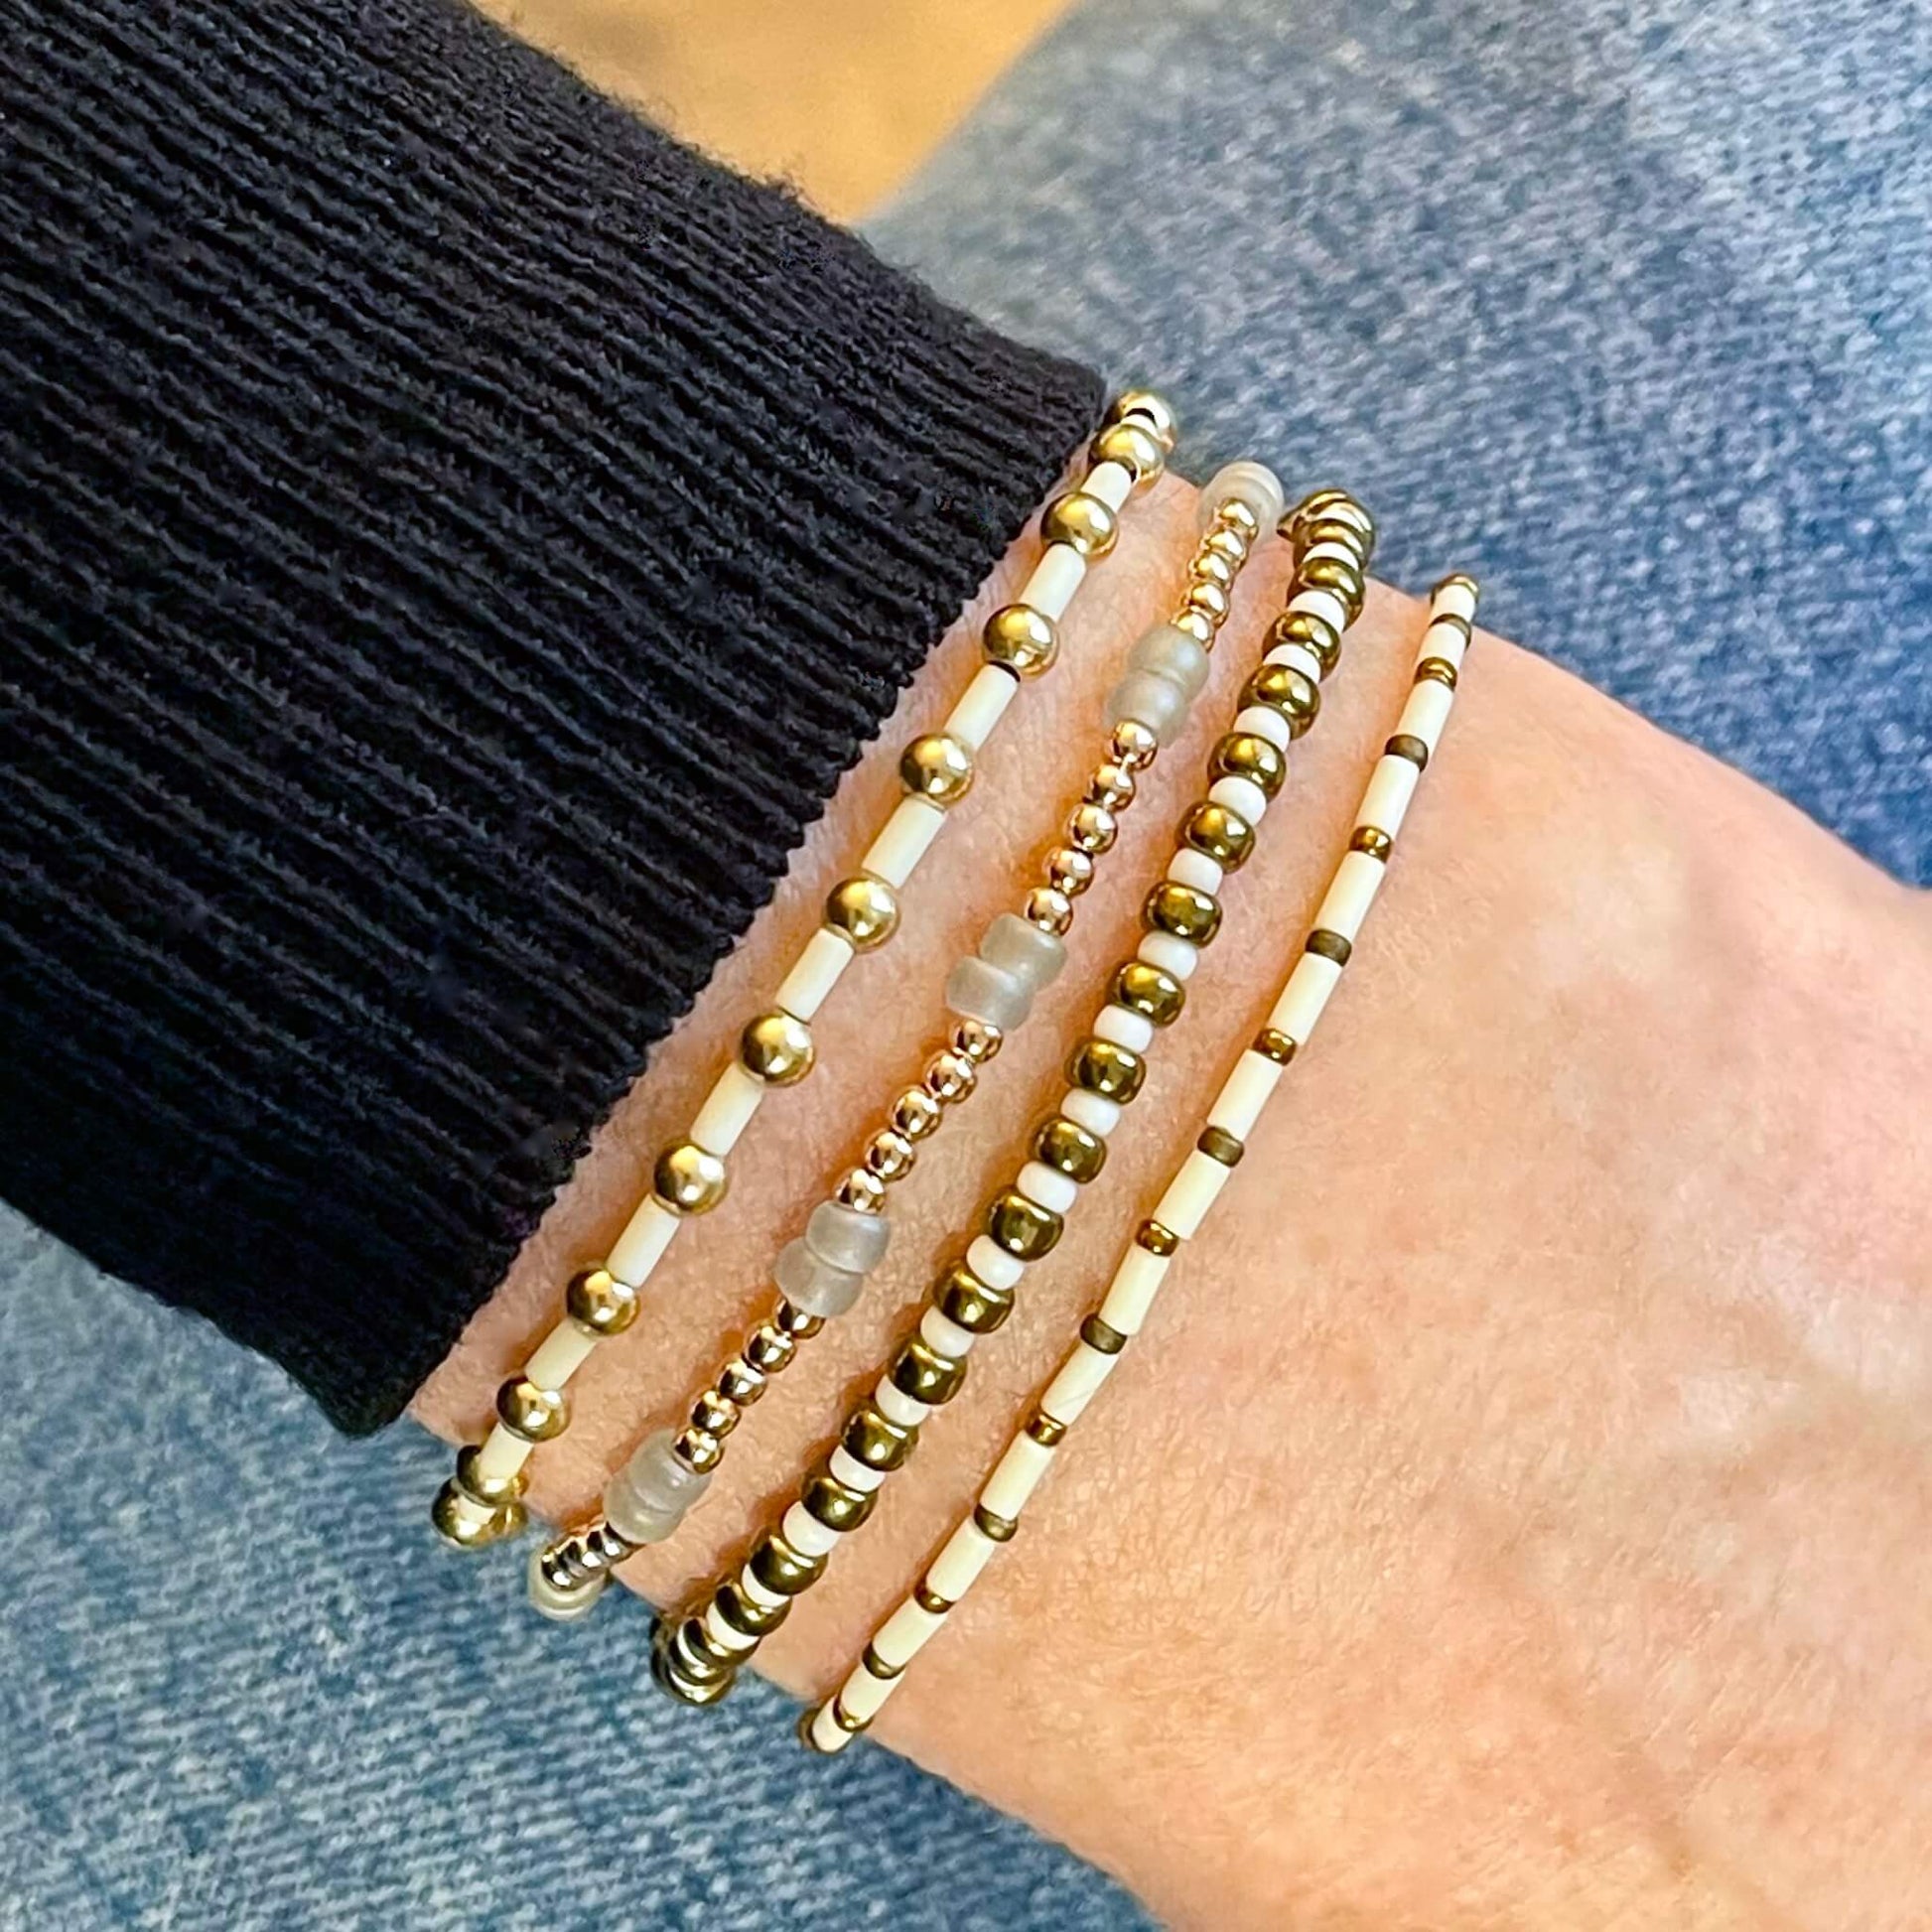 Minimalist gold and white beaded stretch bracelet stack of 4 perfect to wear as a set or to easily mix and style with other bracelets.